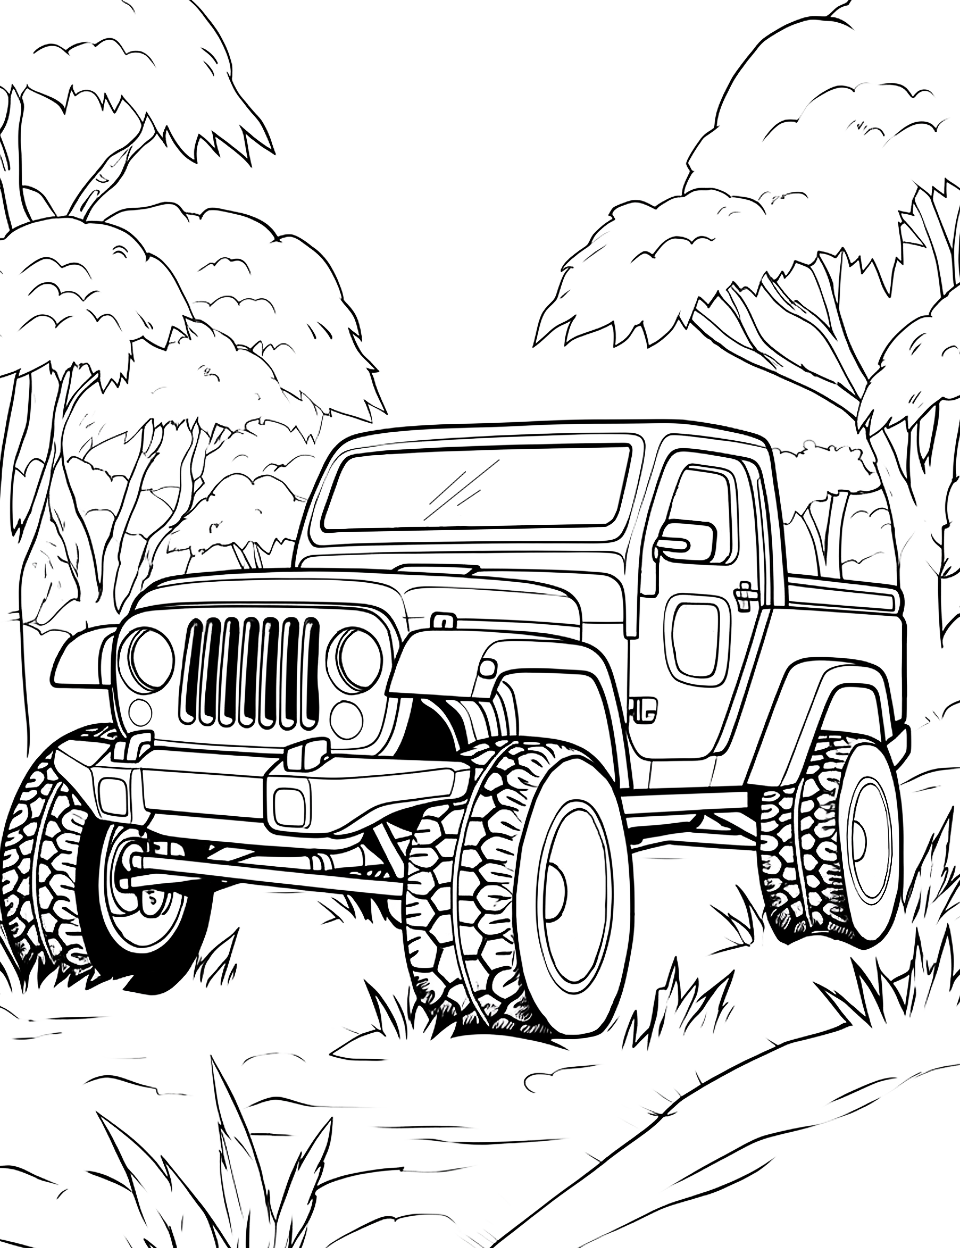 Jeep's Jungle Jam Monster Truck Coloring Page - A Jeep-themed monster truck racing through a dense jungle.